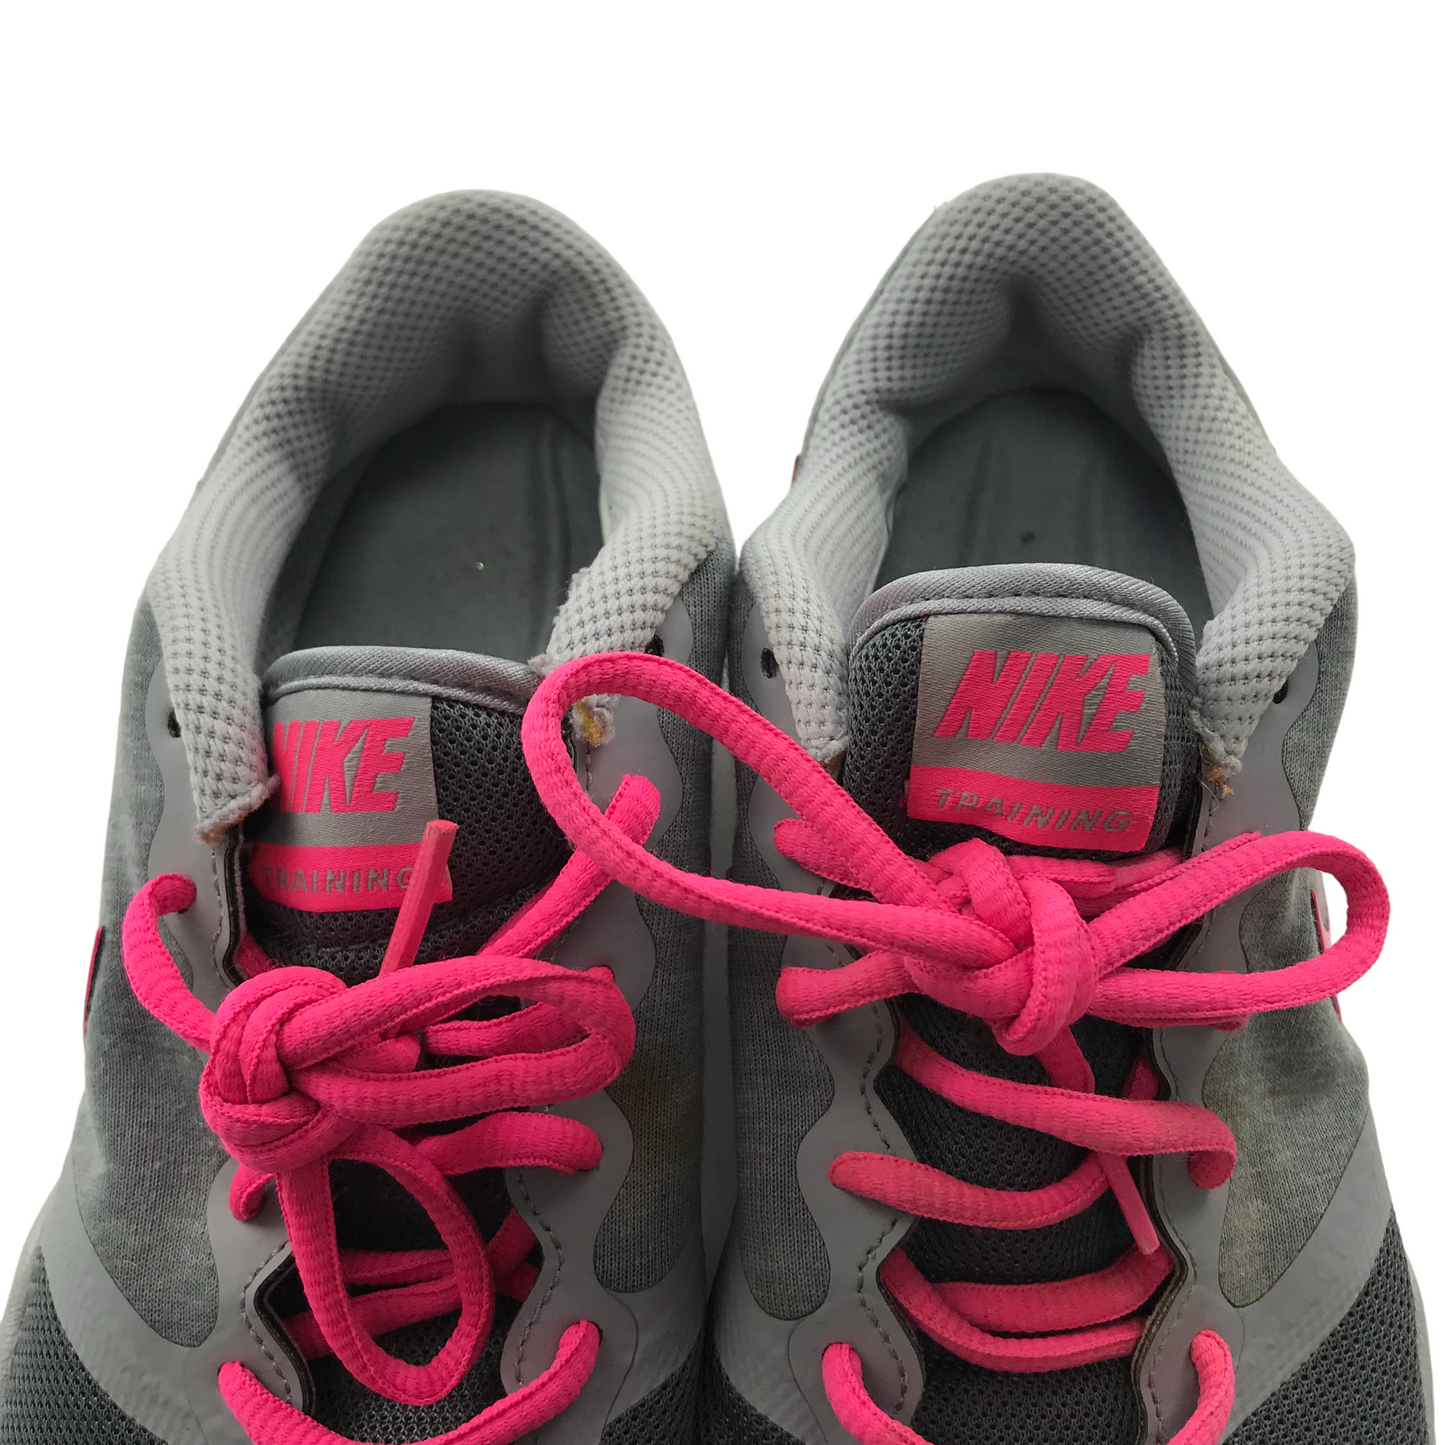 Nike Grey and Pink Trainers Shoe Size 4